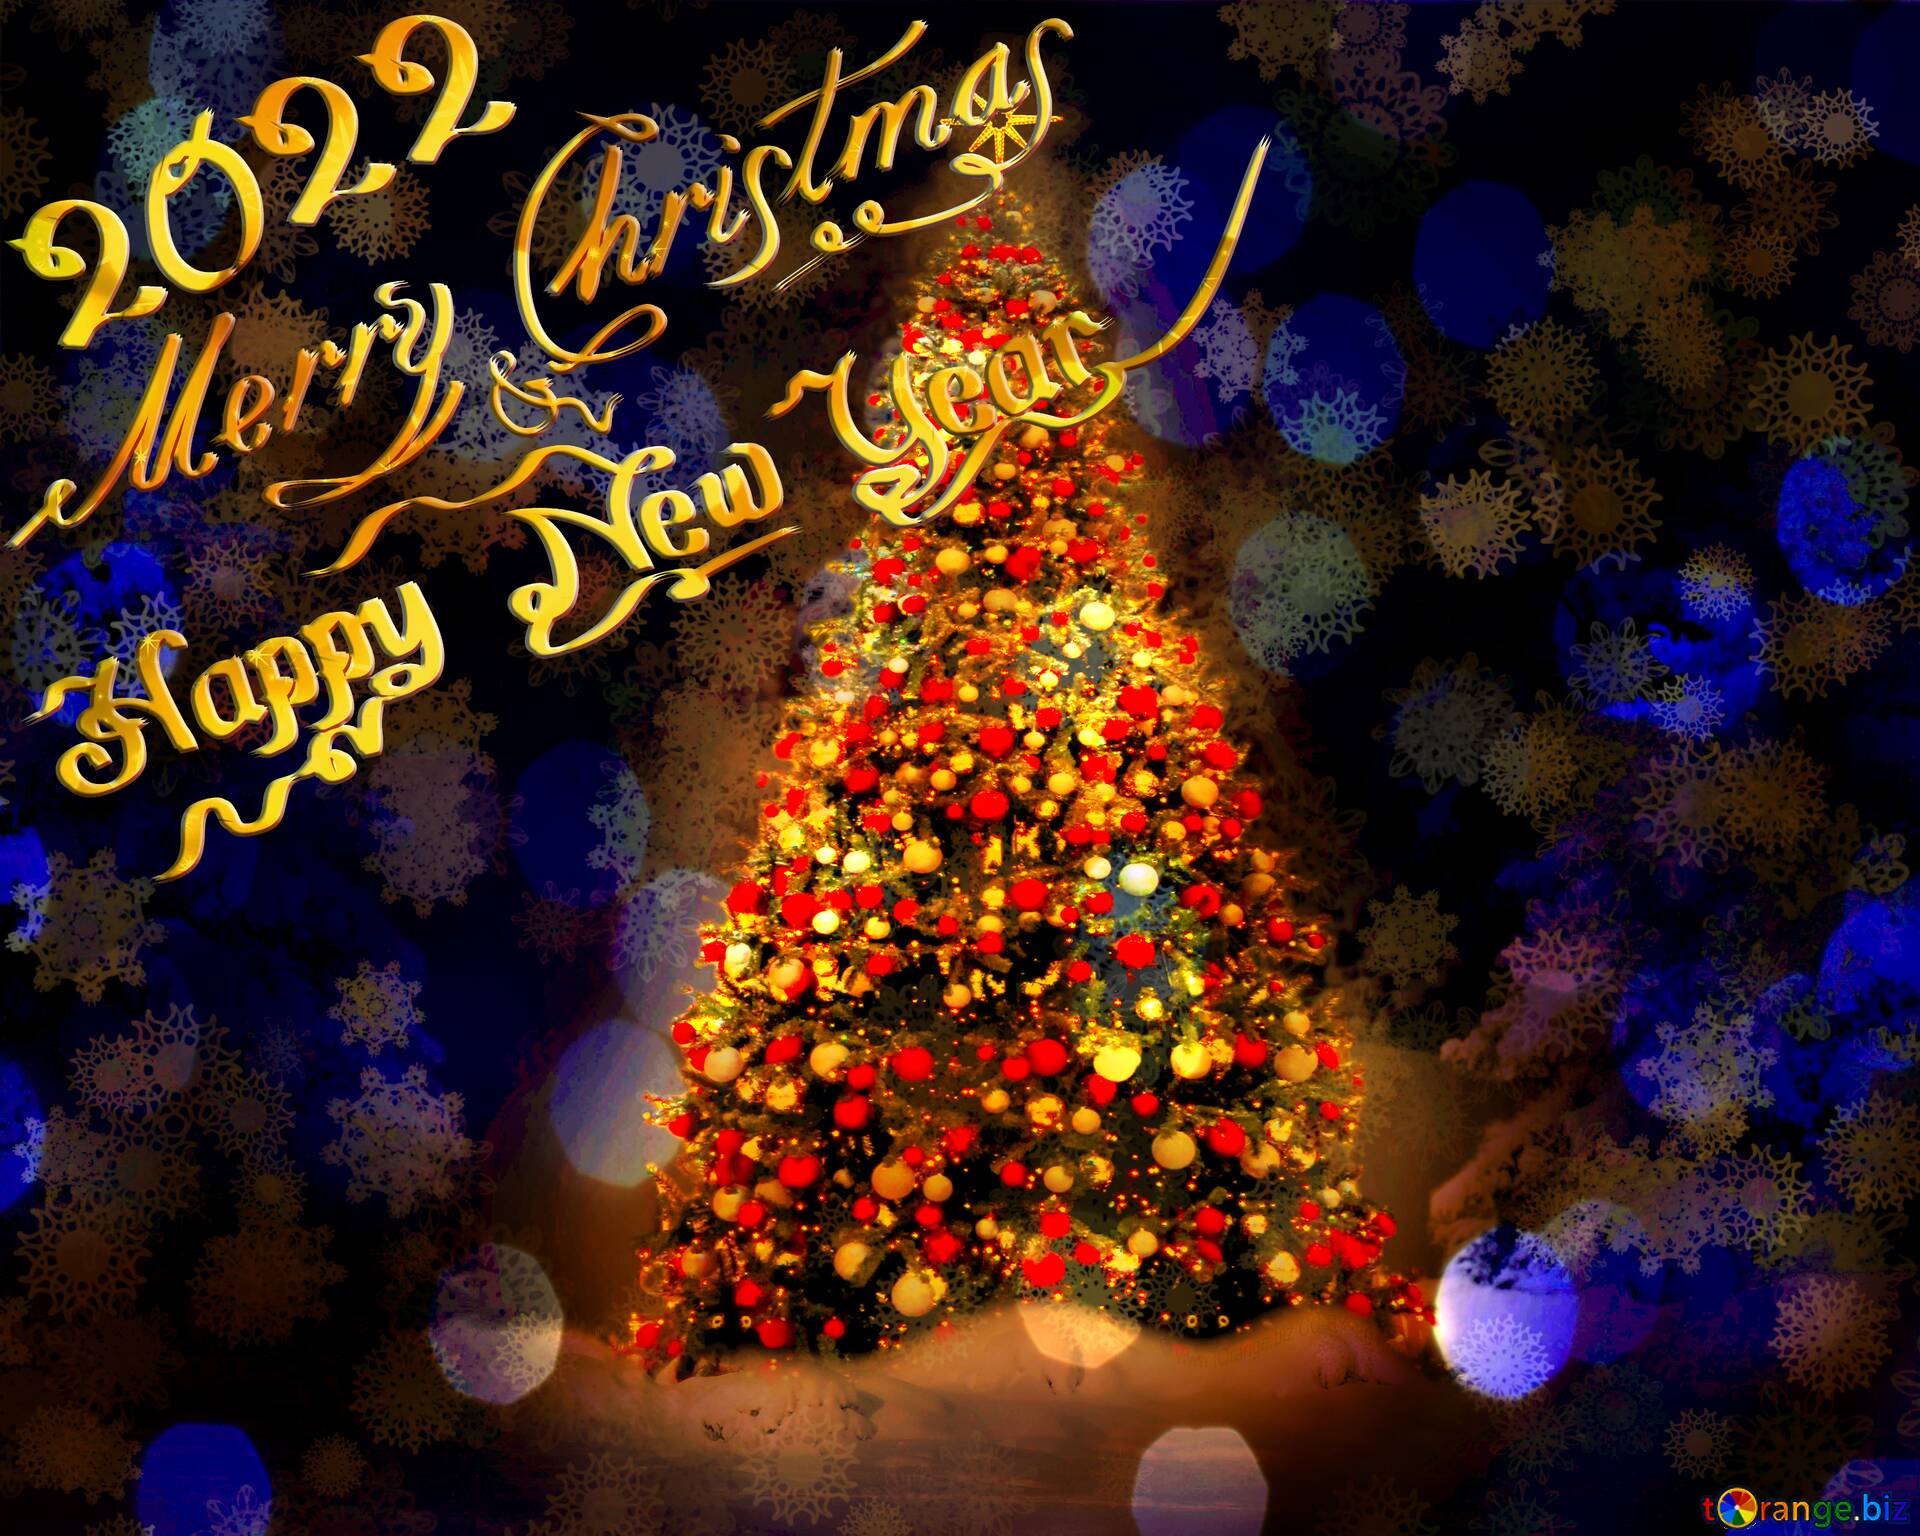 Download Free Picture Christmas Tree Card 2022 On CC BY License Free Image Stock TOrange.biz Fx №141085